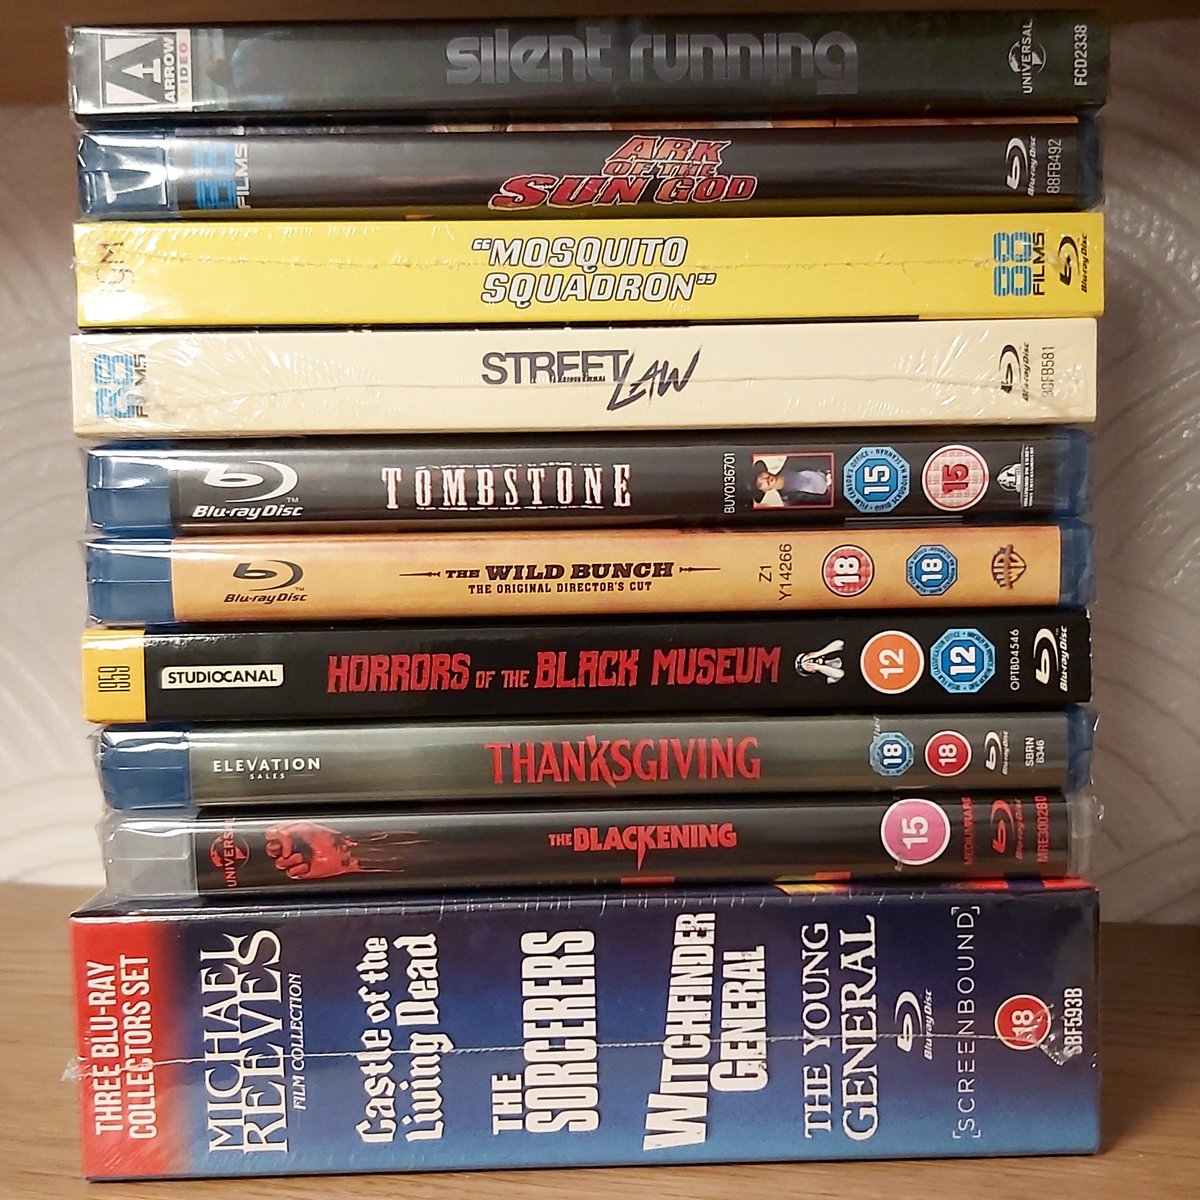 Visited @hmvmeadowhall @hmvtweets to browse for new releases & films that are on my to buy list. I picked up a mixture of @ArrowFilmsVideo, @88_Films, horror & westerns on #Bluray. Most of these pickups will be first time watches except for The Wild Bunch & Tombstone🔥💿👍